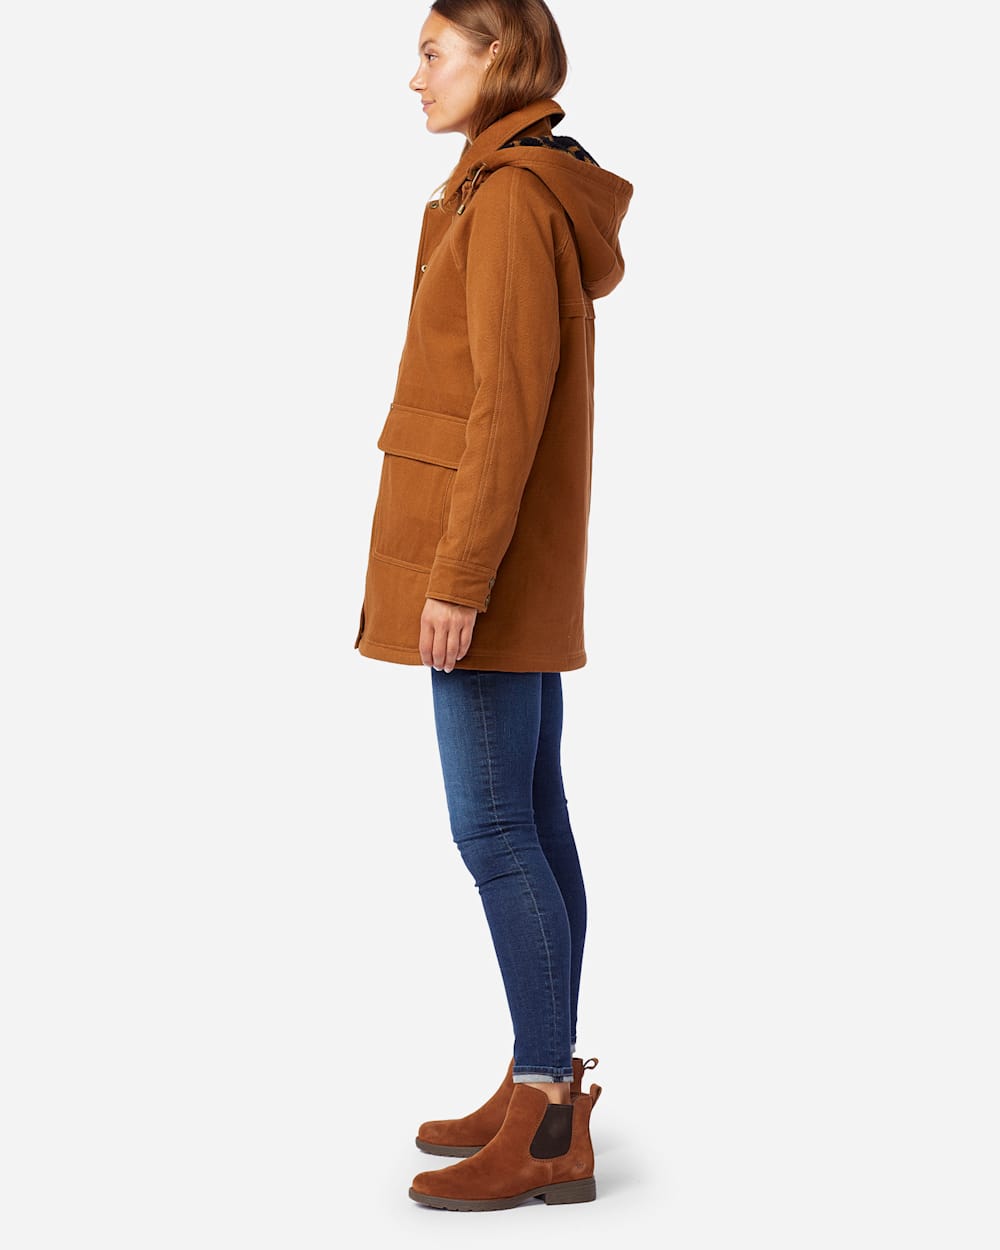 ALTERNATE VIEW OF WOMEN'S ST HELENA SHERPA-LINED COAT IN WHISKEY image number 2